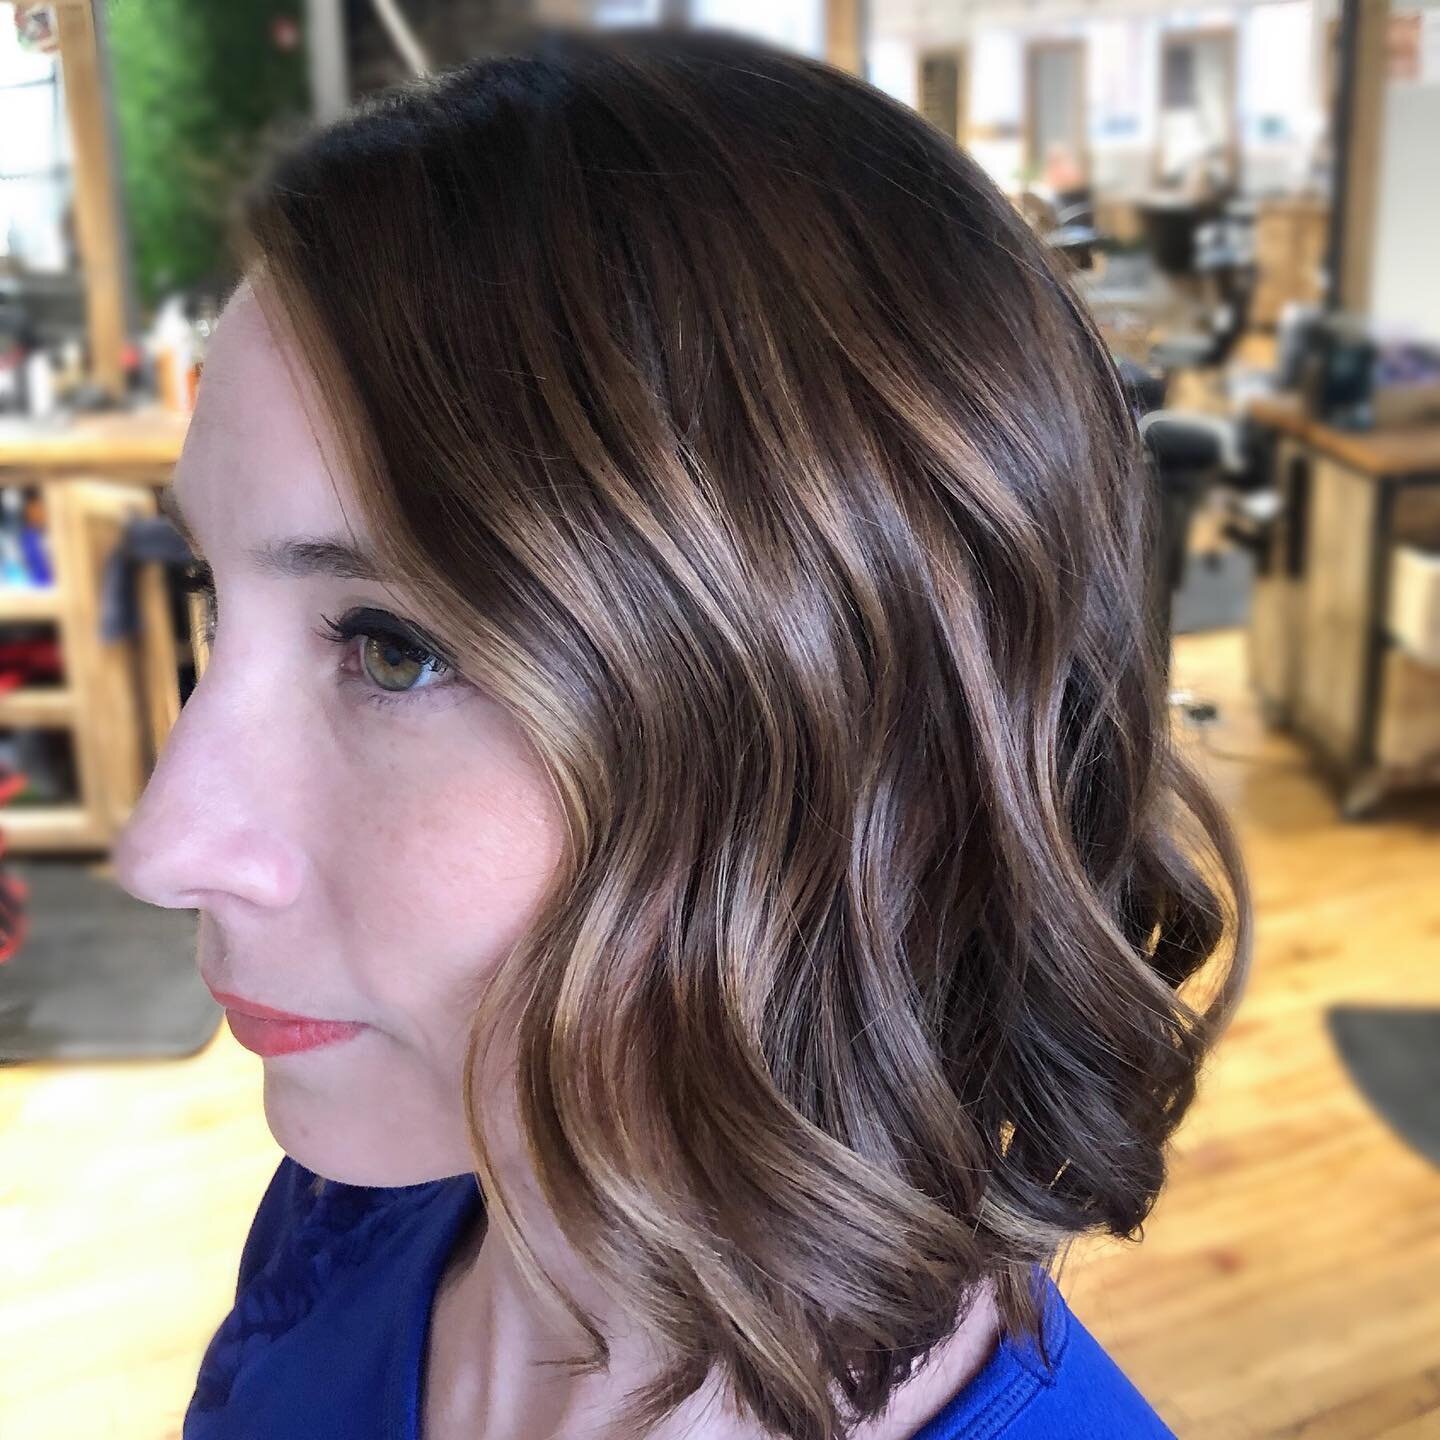 Beautiful After/Before Soft Balayage with Subtle Waves and Cropped Haircut. .
.
.
.
#reclaimyourbeauty #webstergroves #blvdstl #websterhairstylist